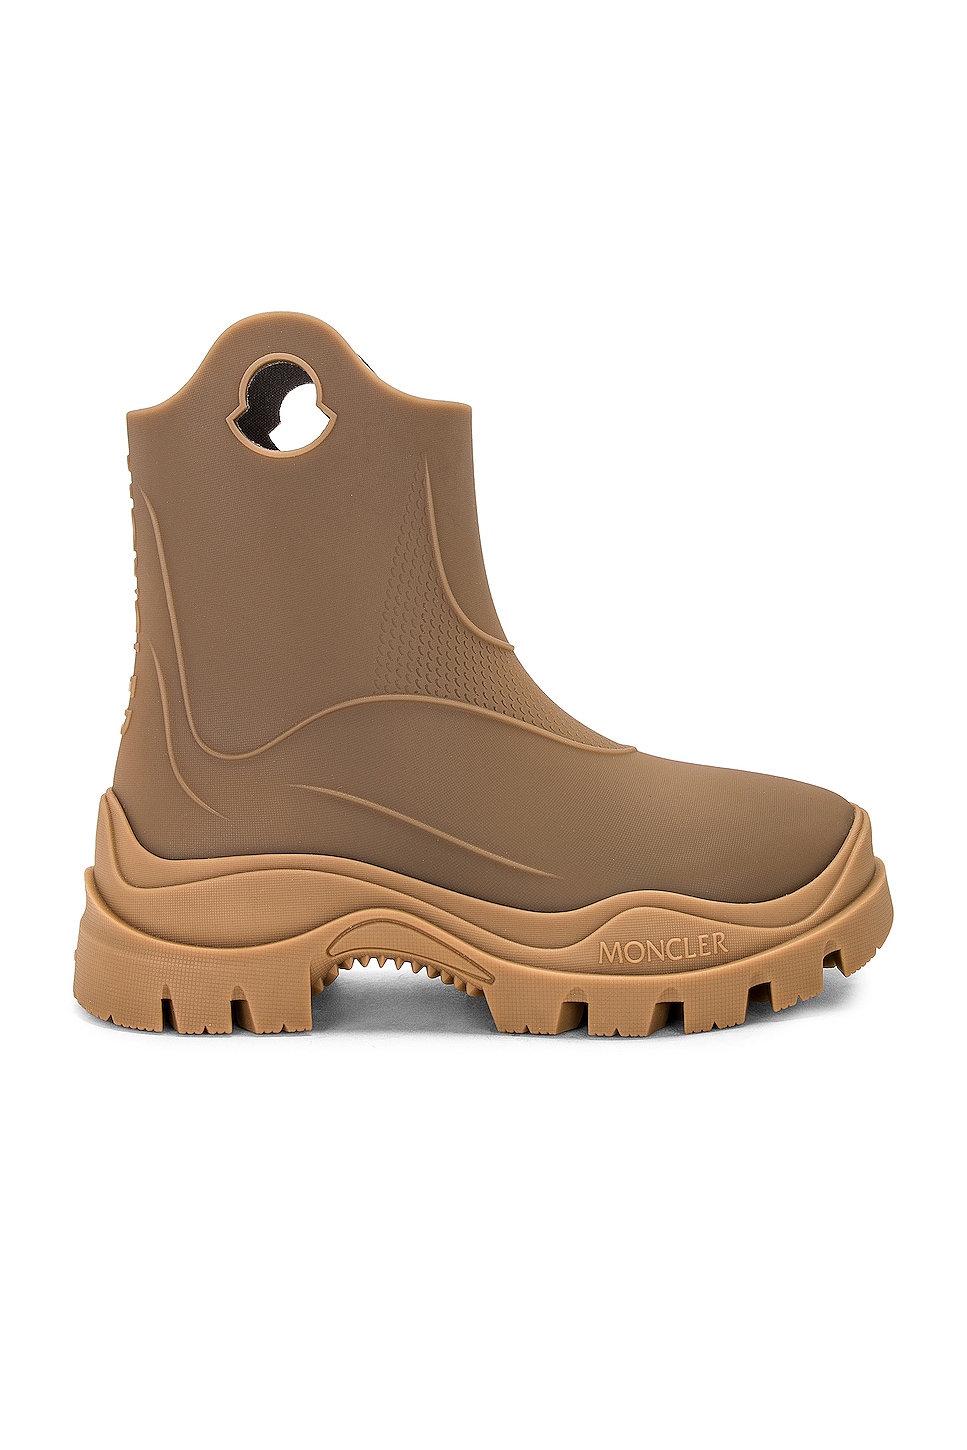 Image 1 of Moncler Misty Rain Boot in Nude